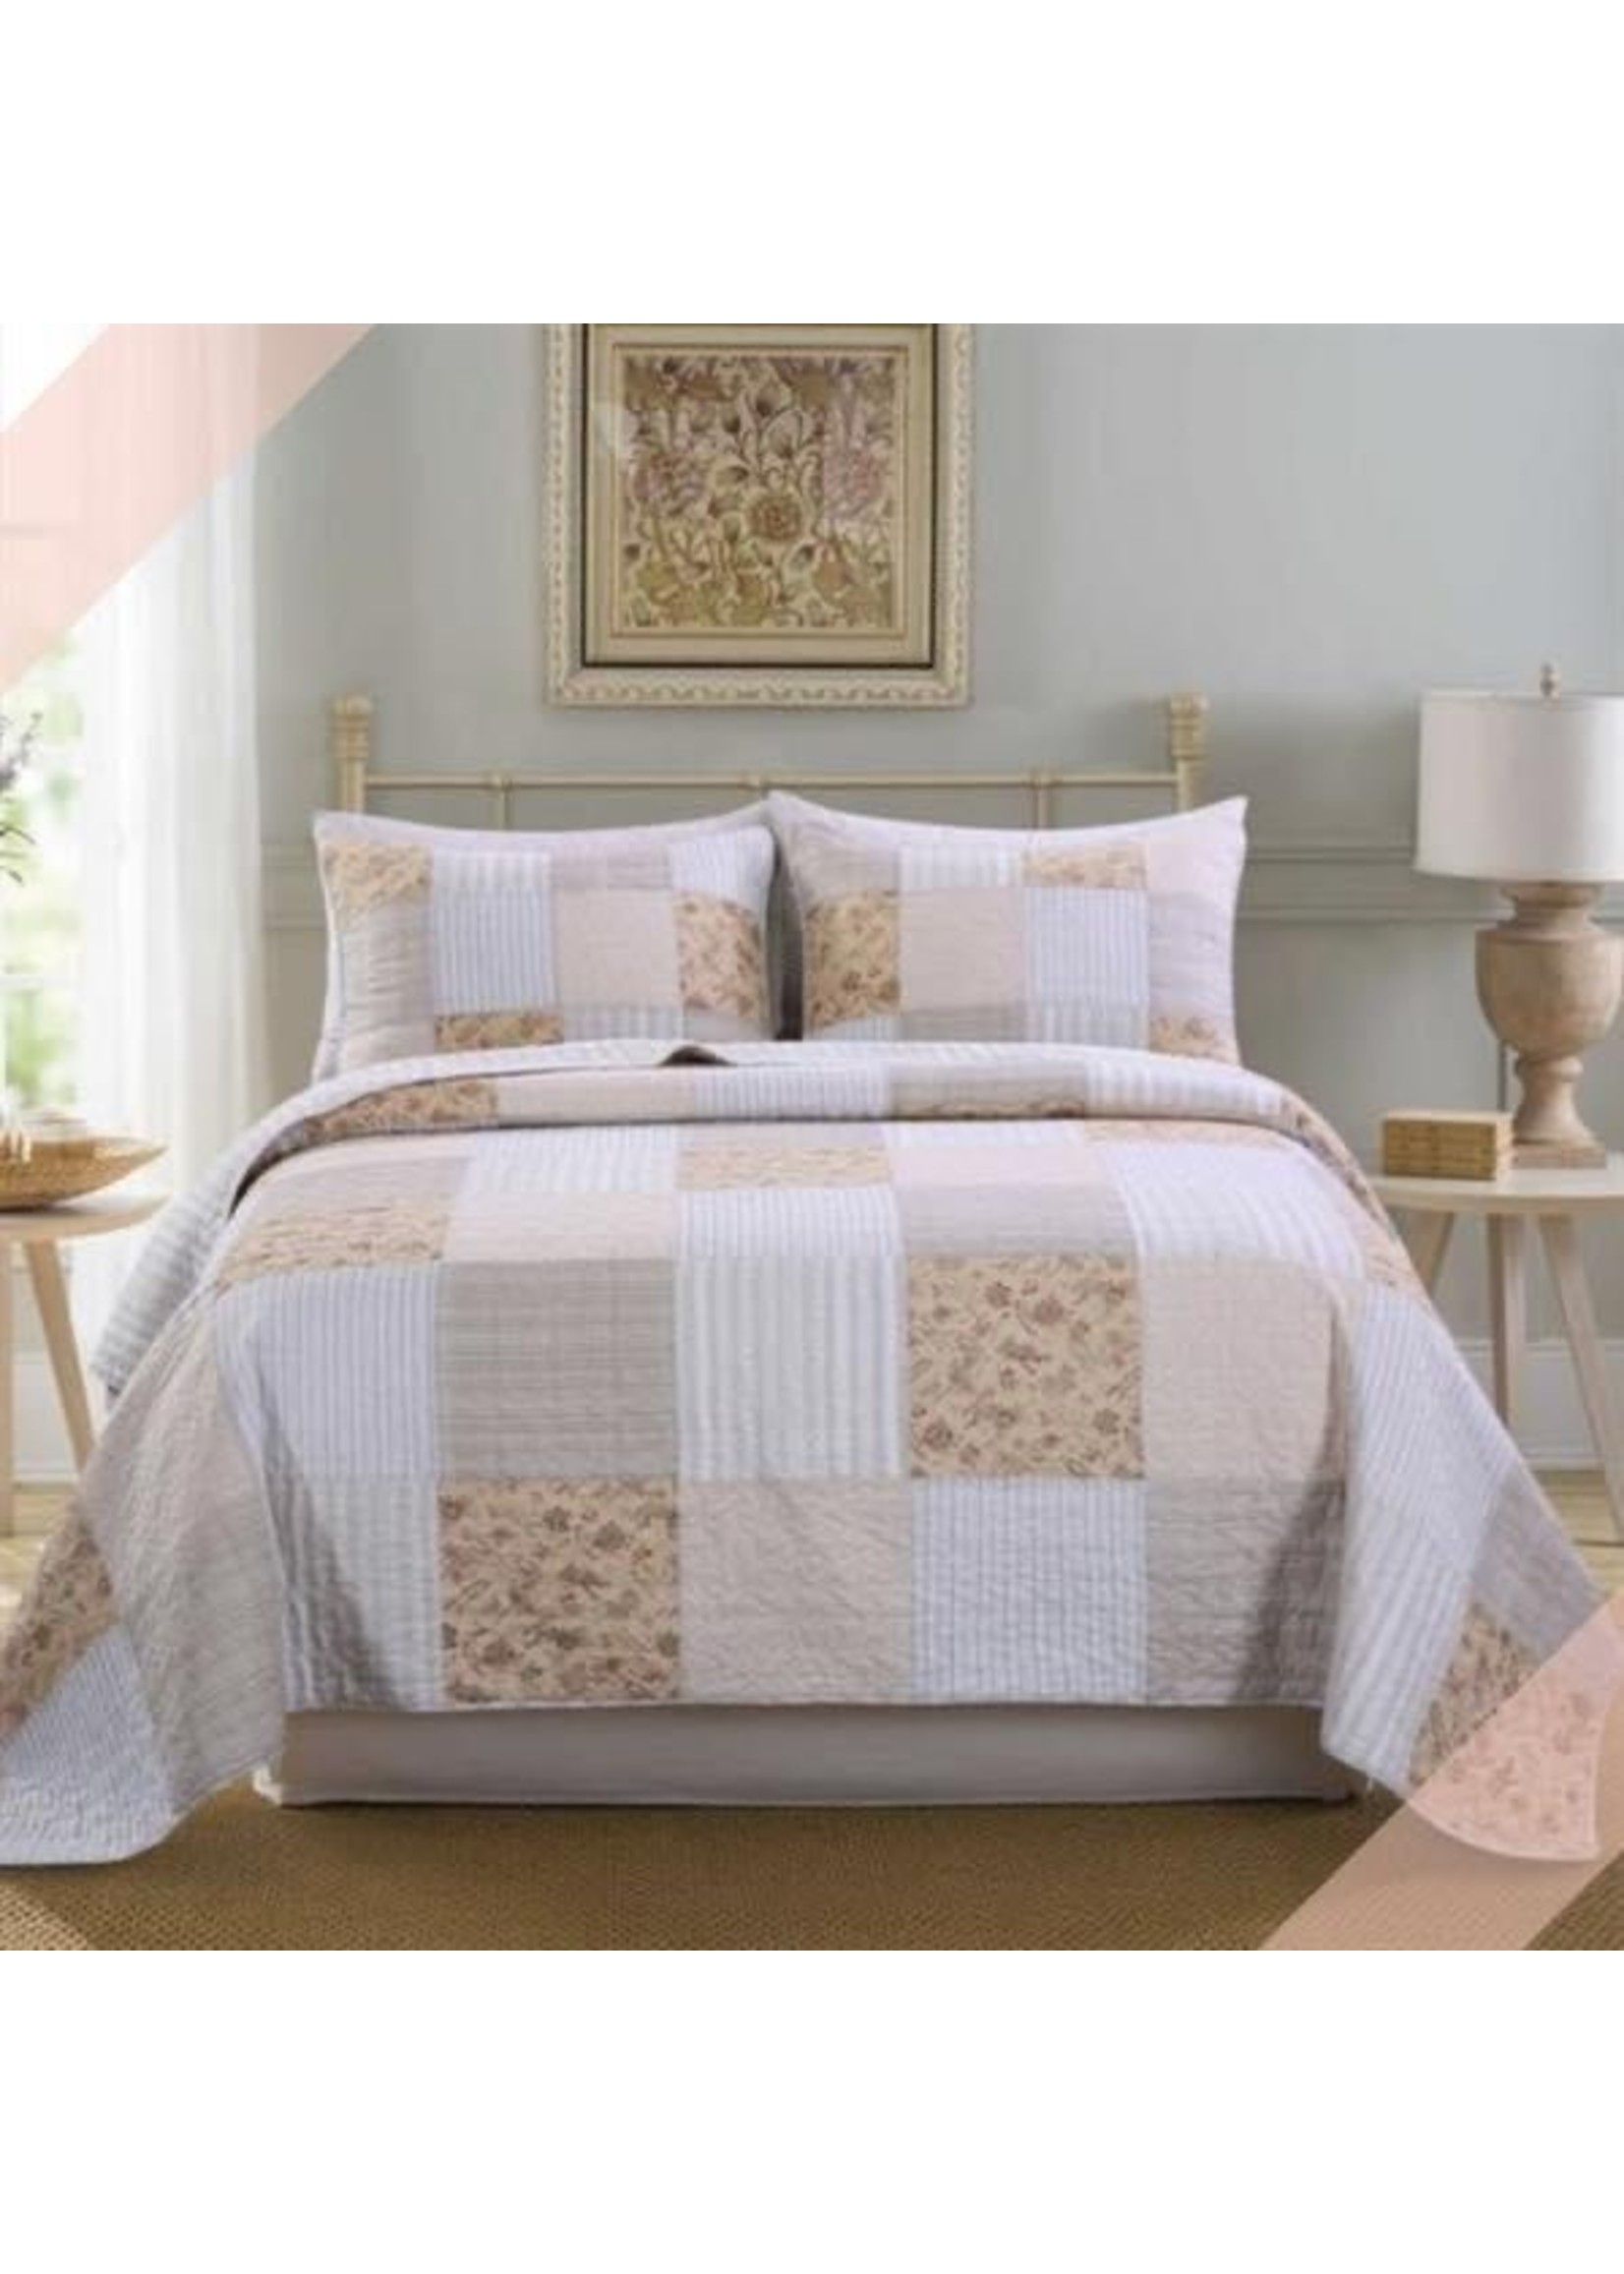 Quilt Set “Cindy” - Queen - PICK UP ONLY